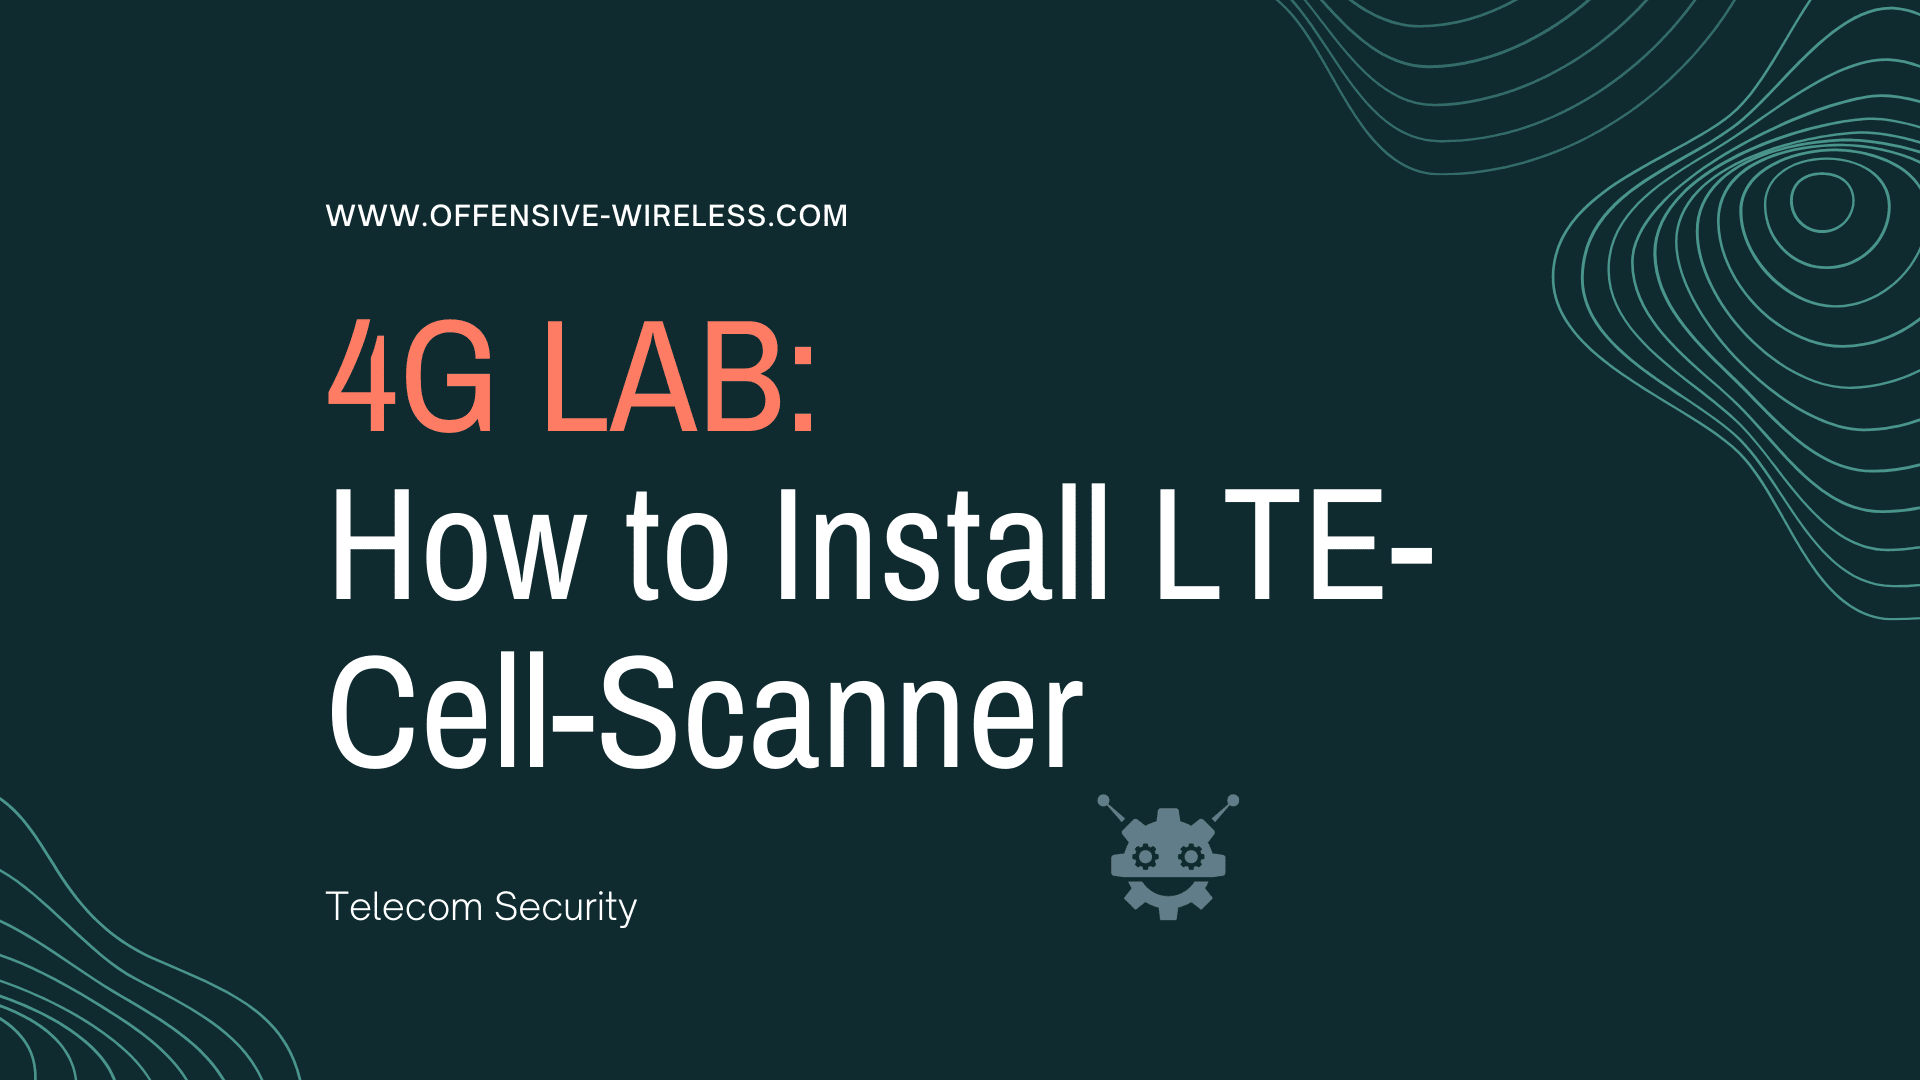 How to Install LTE-Cell-Scanner